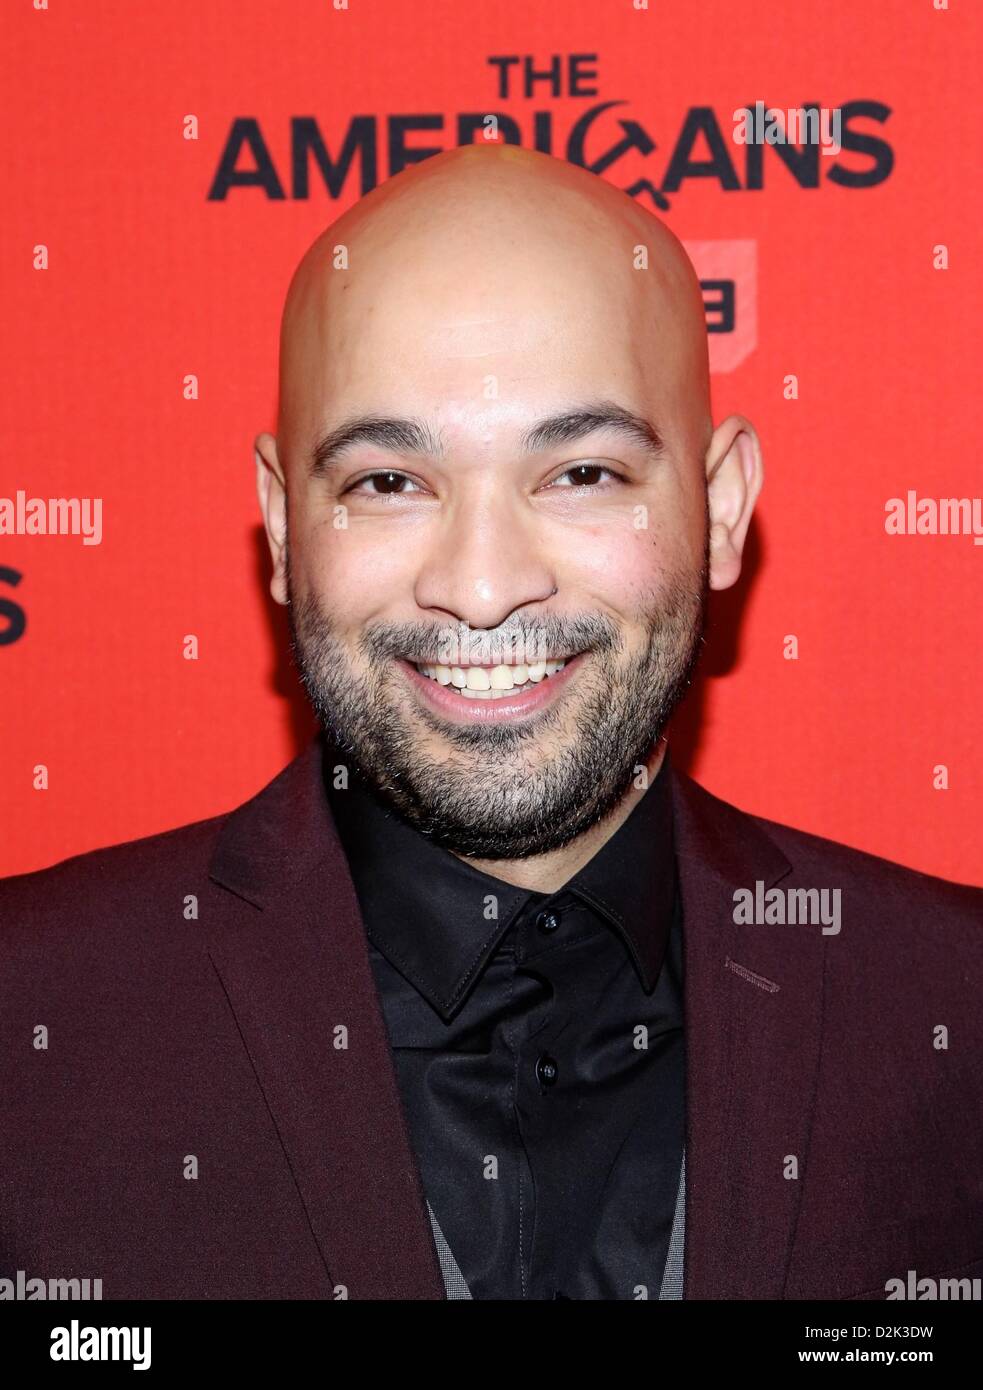 Maximiliano Hernandez at arrivals for THE AMERICANS Series Premiere on FX, Directors Guild of America (DGA) Theater, New York, NY January 26, 2013. Photo By: Andres Otero/Everett Collection/Alamy Live News Stock Photo